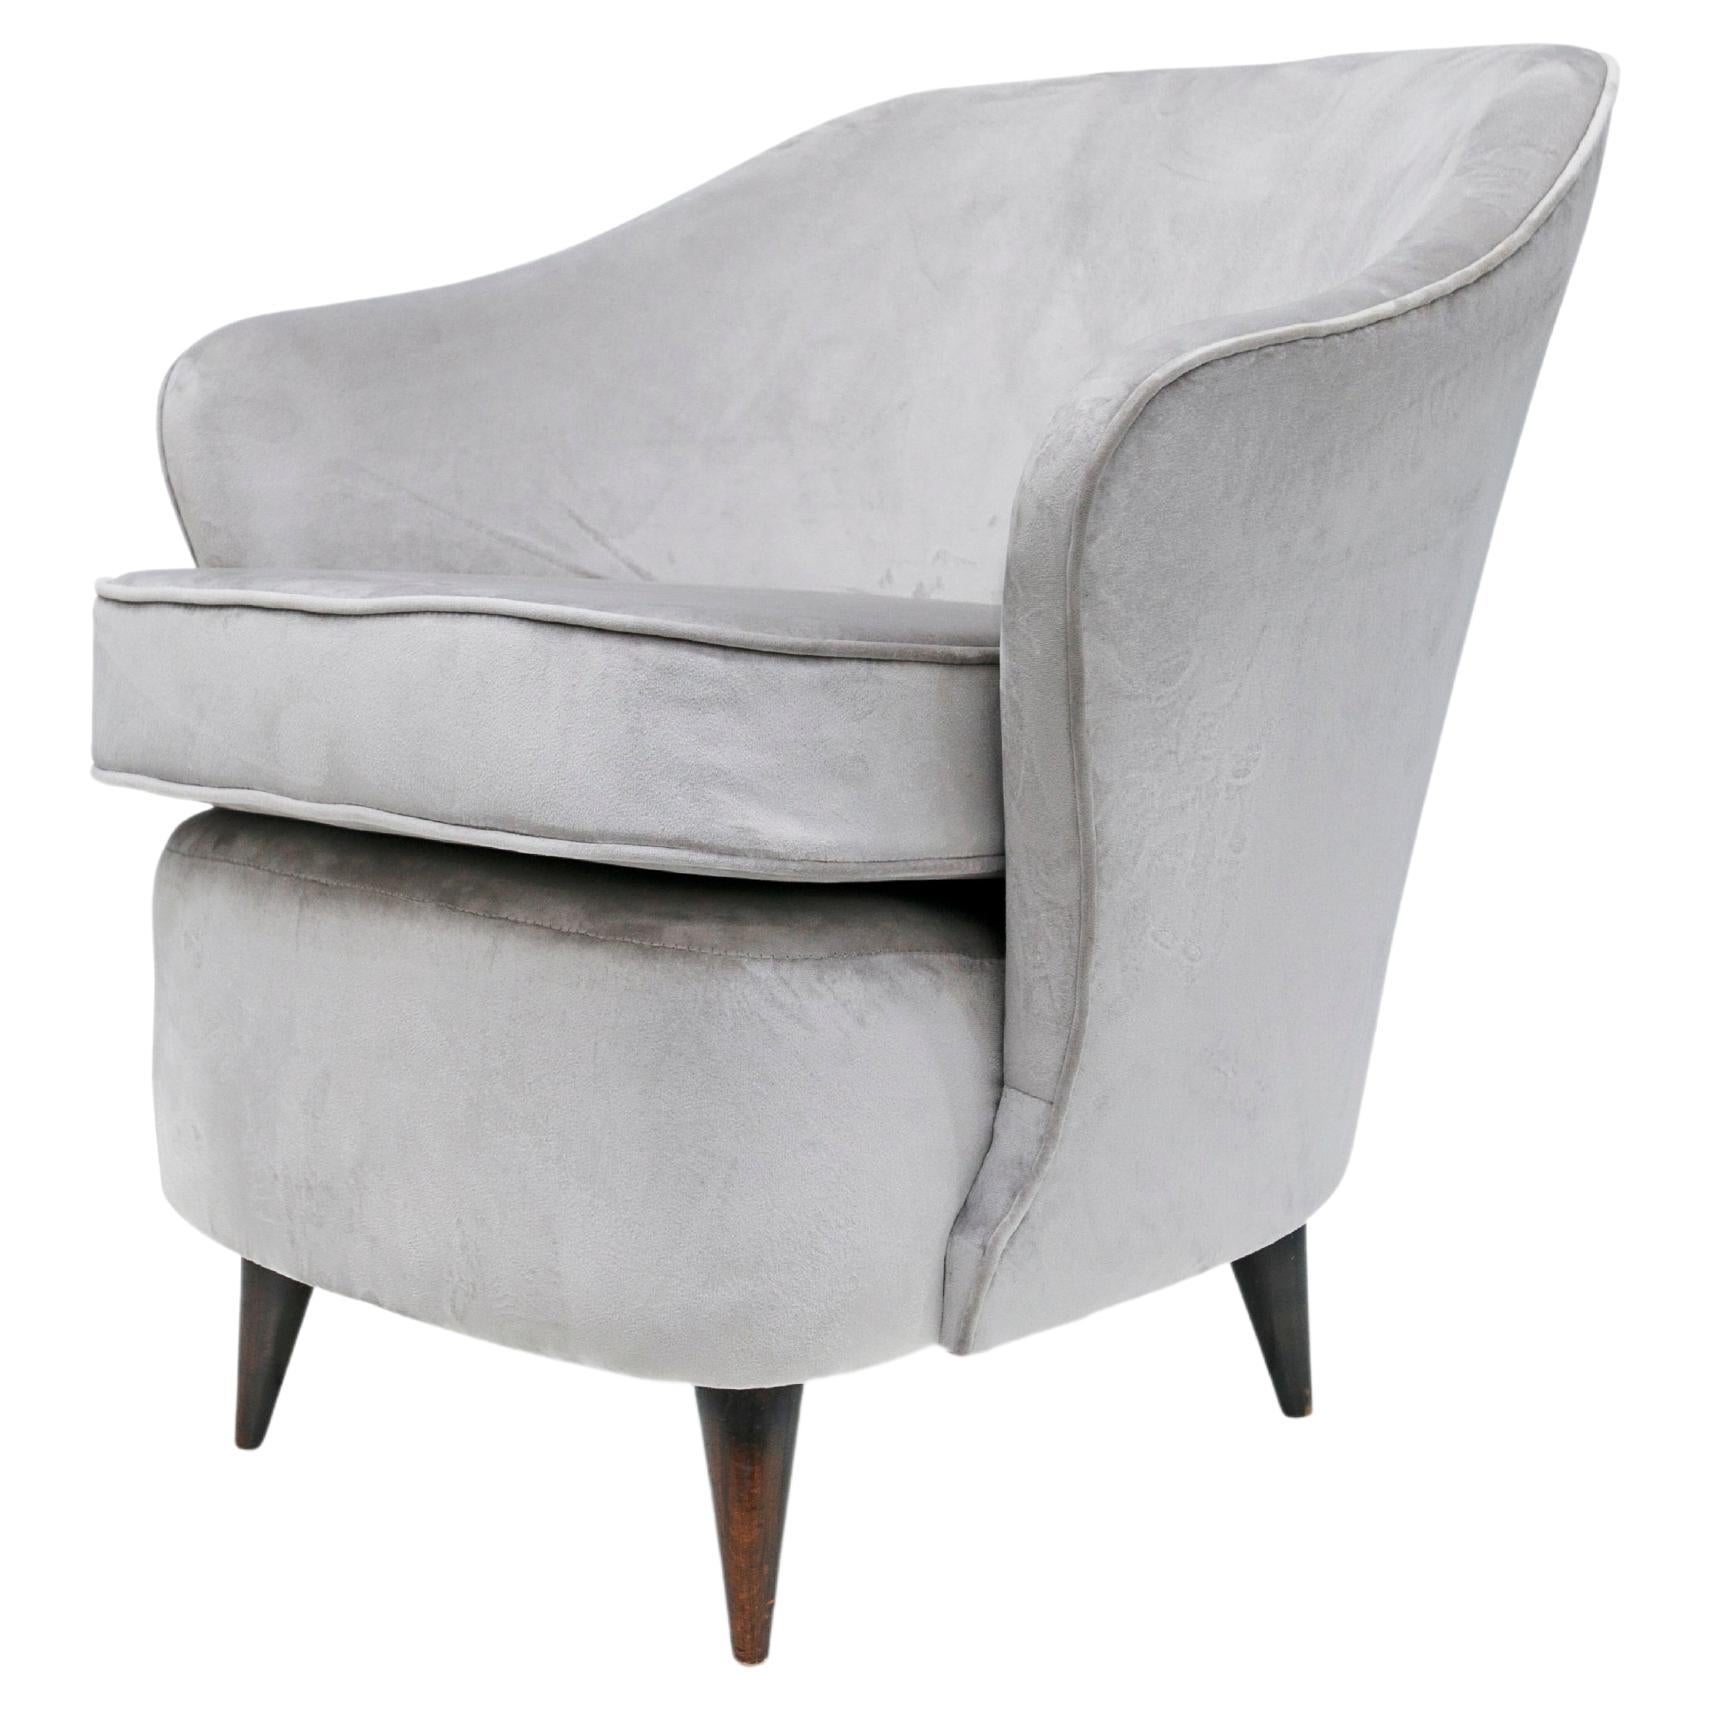 Thick Armchair in Grey Fabric Attributed to Joaquim Tenreiro, c. 1950s